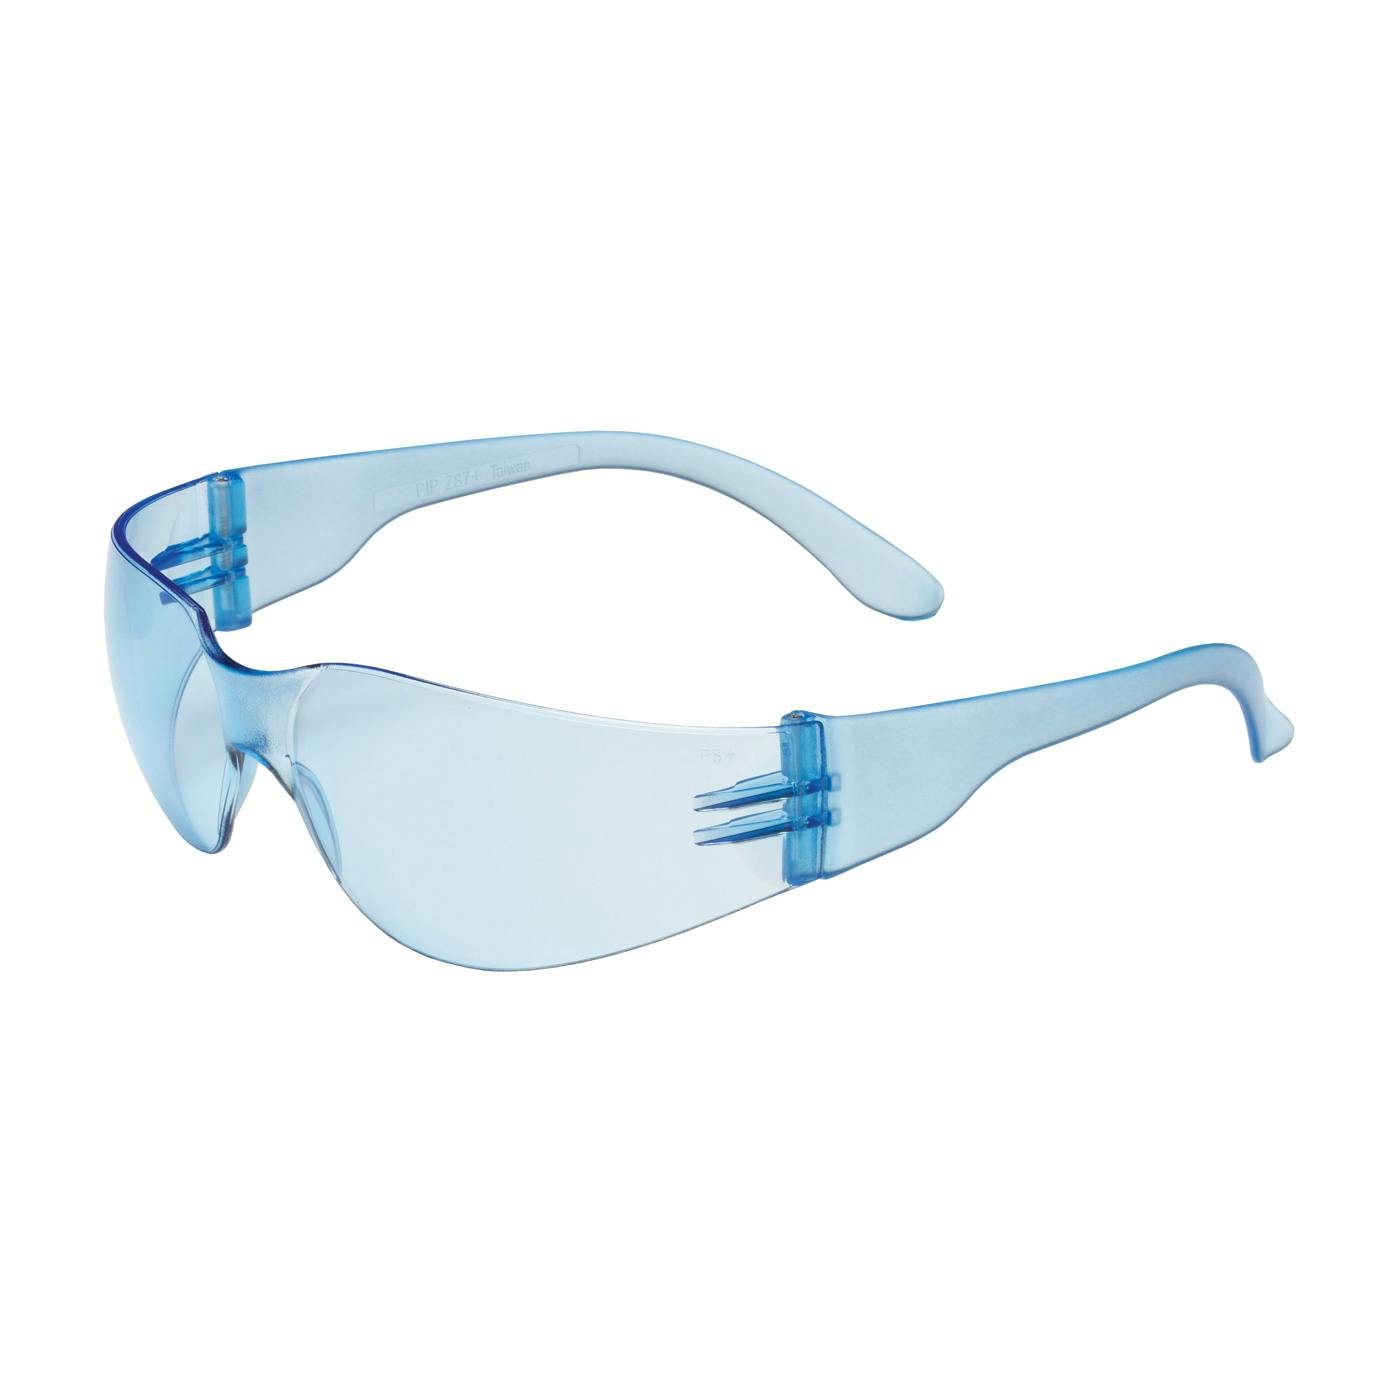 Rimless Safety Glasses with Light Blue Temple, Light Blue Lens and Anti-Scratch Coating, Light Blue (250-01-5503) - OS